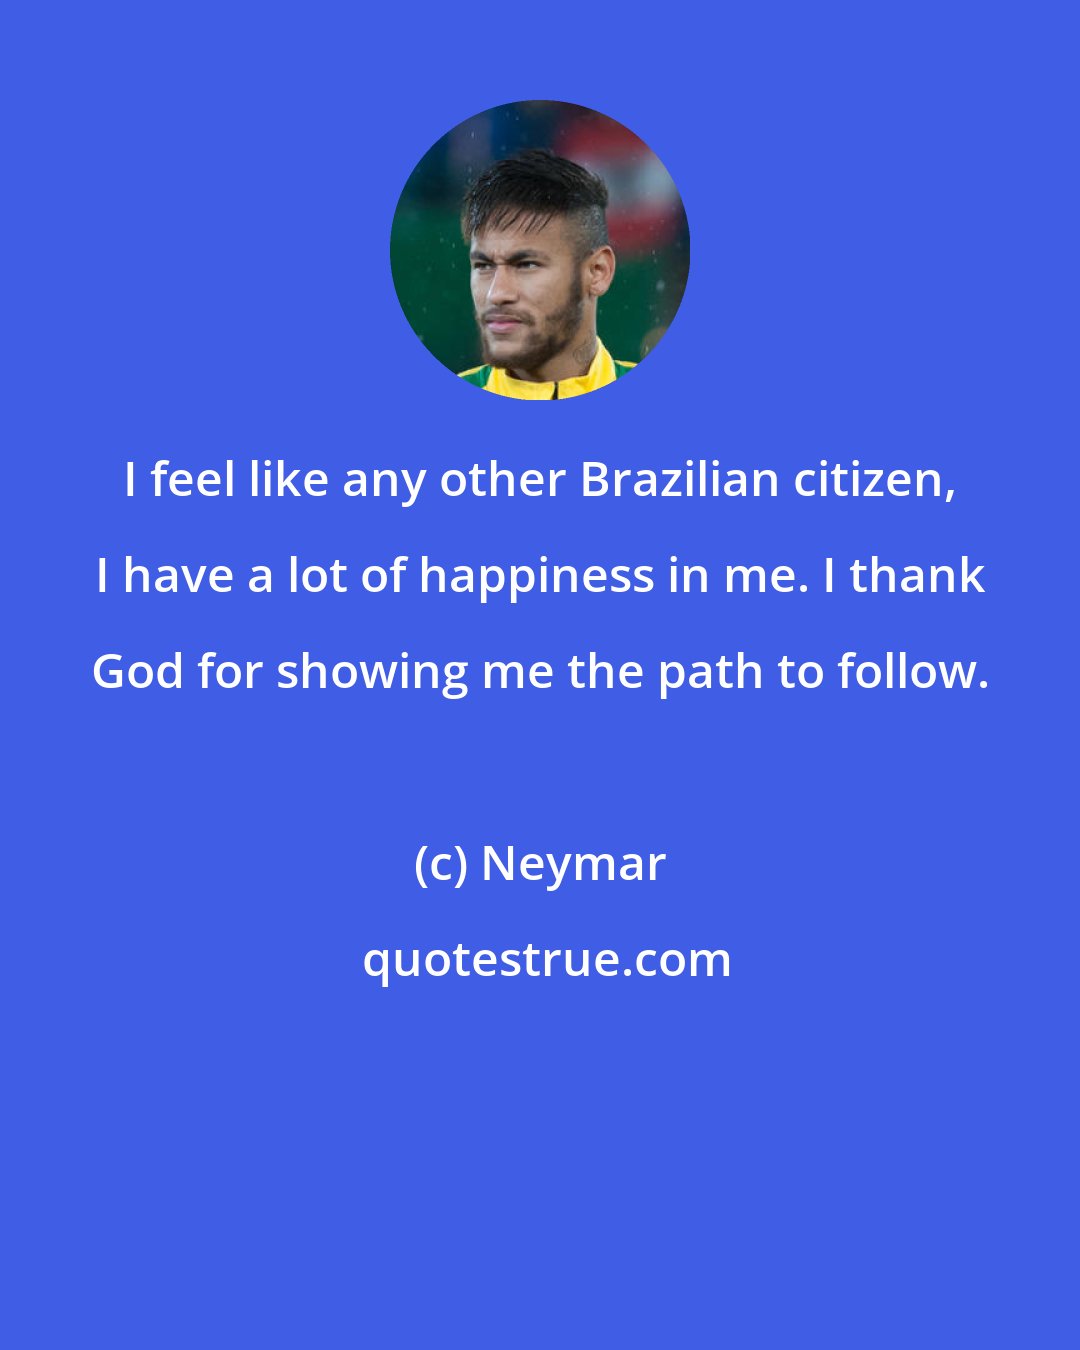 Neymar: I feel like any other Brazilian citizen, I have a lot of happiness in me. I thank God for showing me the path to follow.